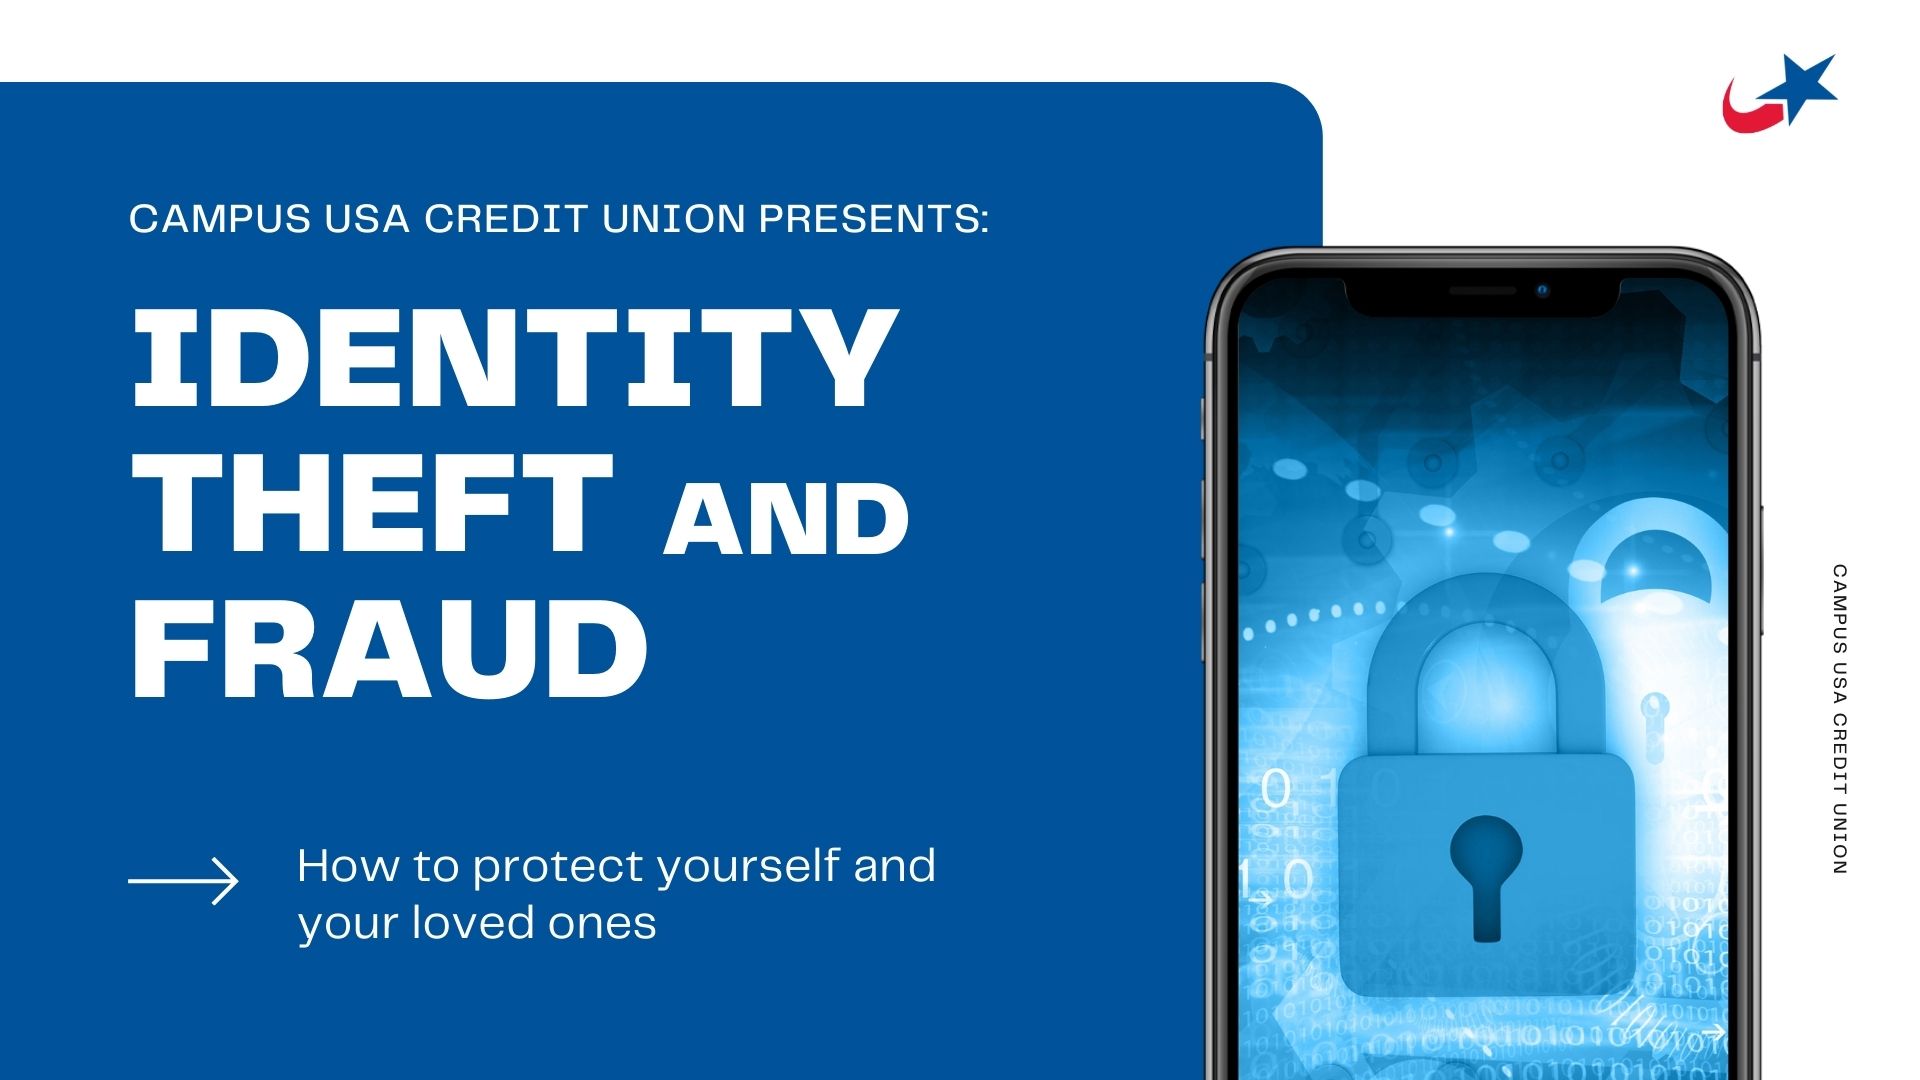 CAMPUS USA Credit Union Presents: Identity Theft and Fraud: How to protect yourself and your loved ones